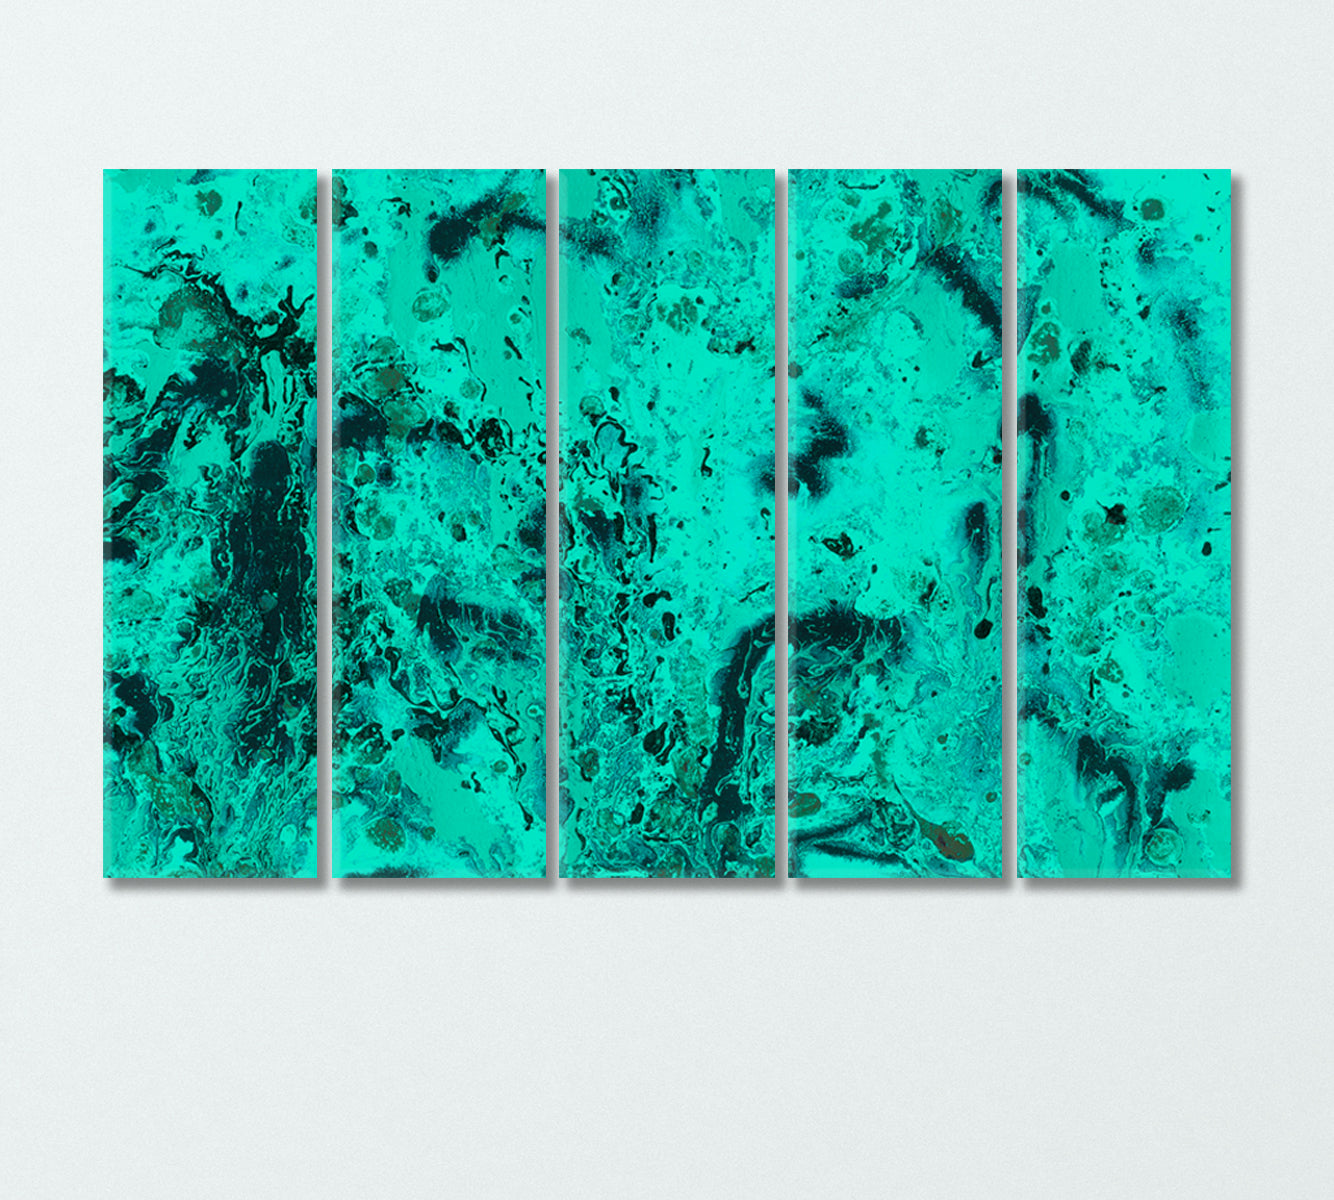 Abstract Turquoise Watercolor Splashes Canvas Print-Canvas Print-CetArt-5 Panels-36x24 inches-CetArt